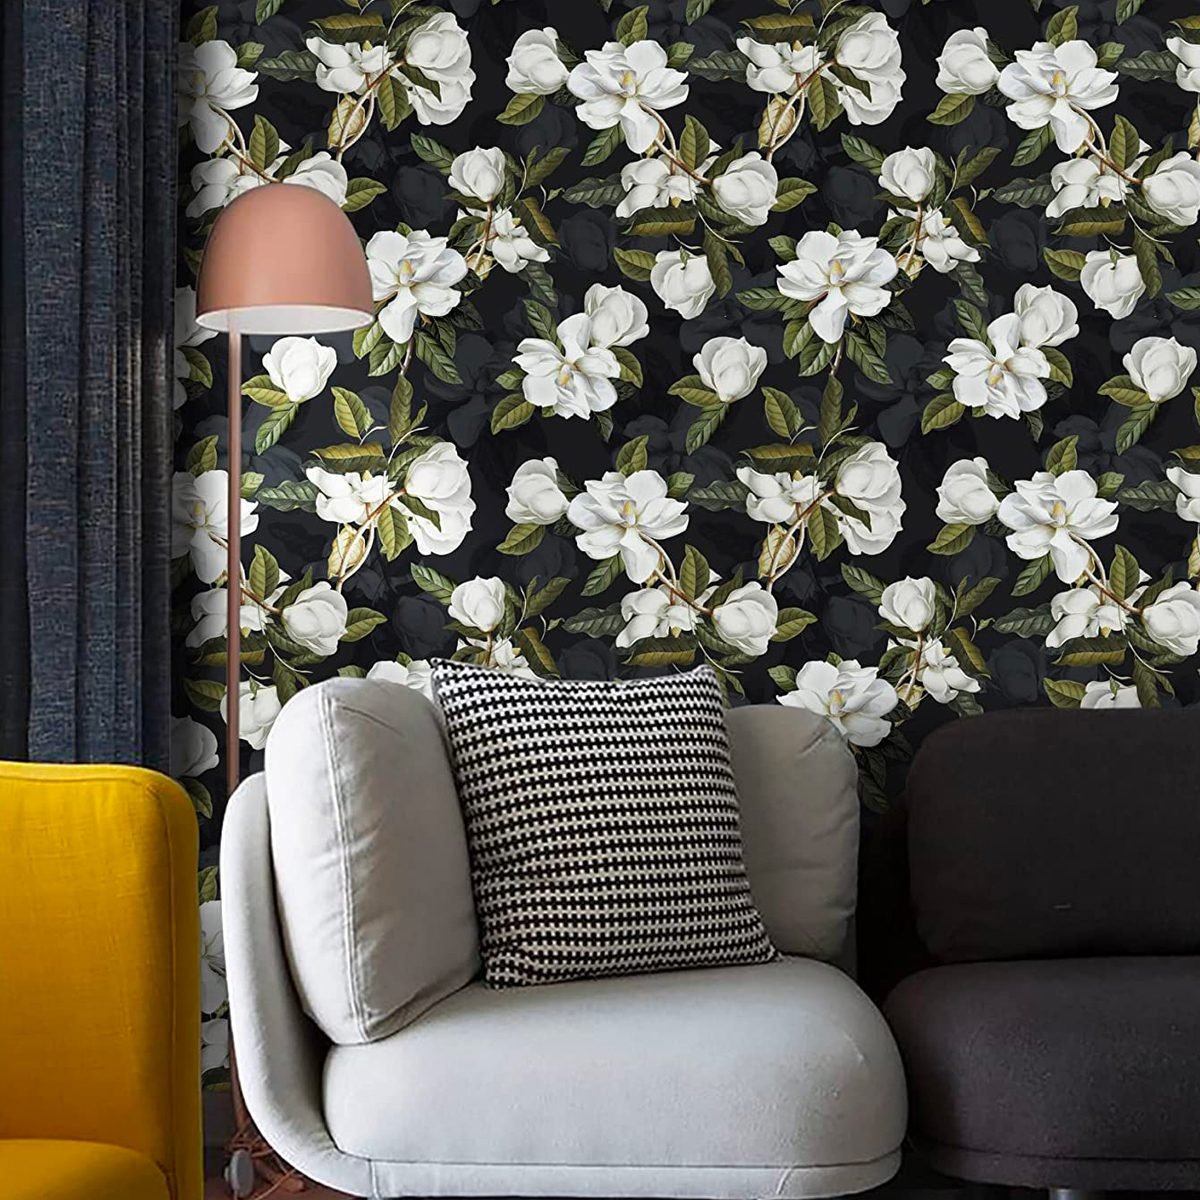 HaokHome Peel And Stick Gardenia Floral Wallpaper Removable Ecomm Amazon.com  ?resize=700